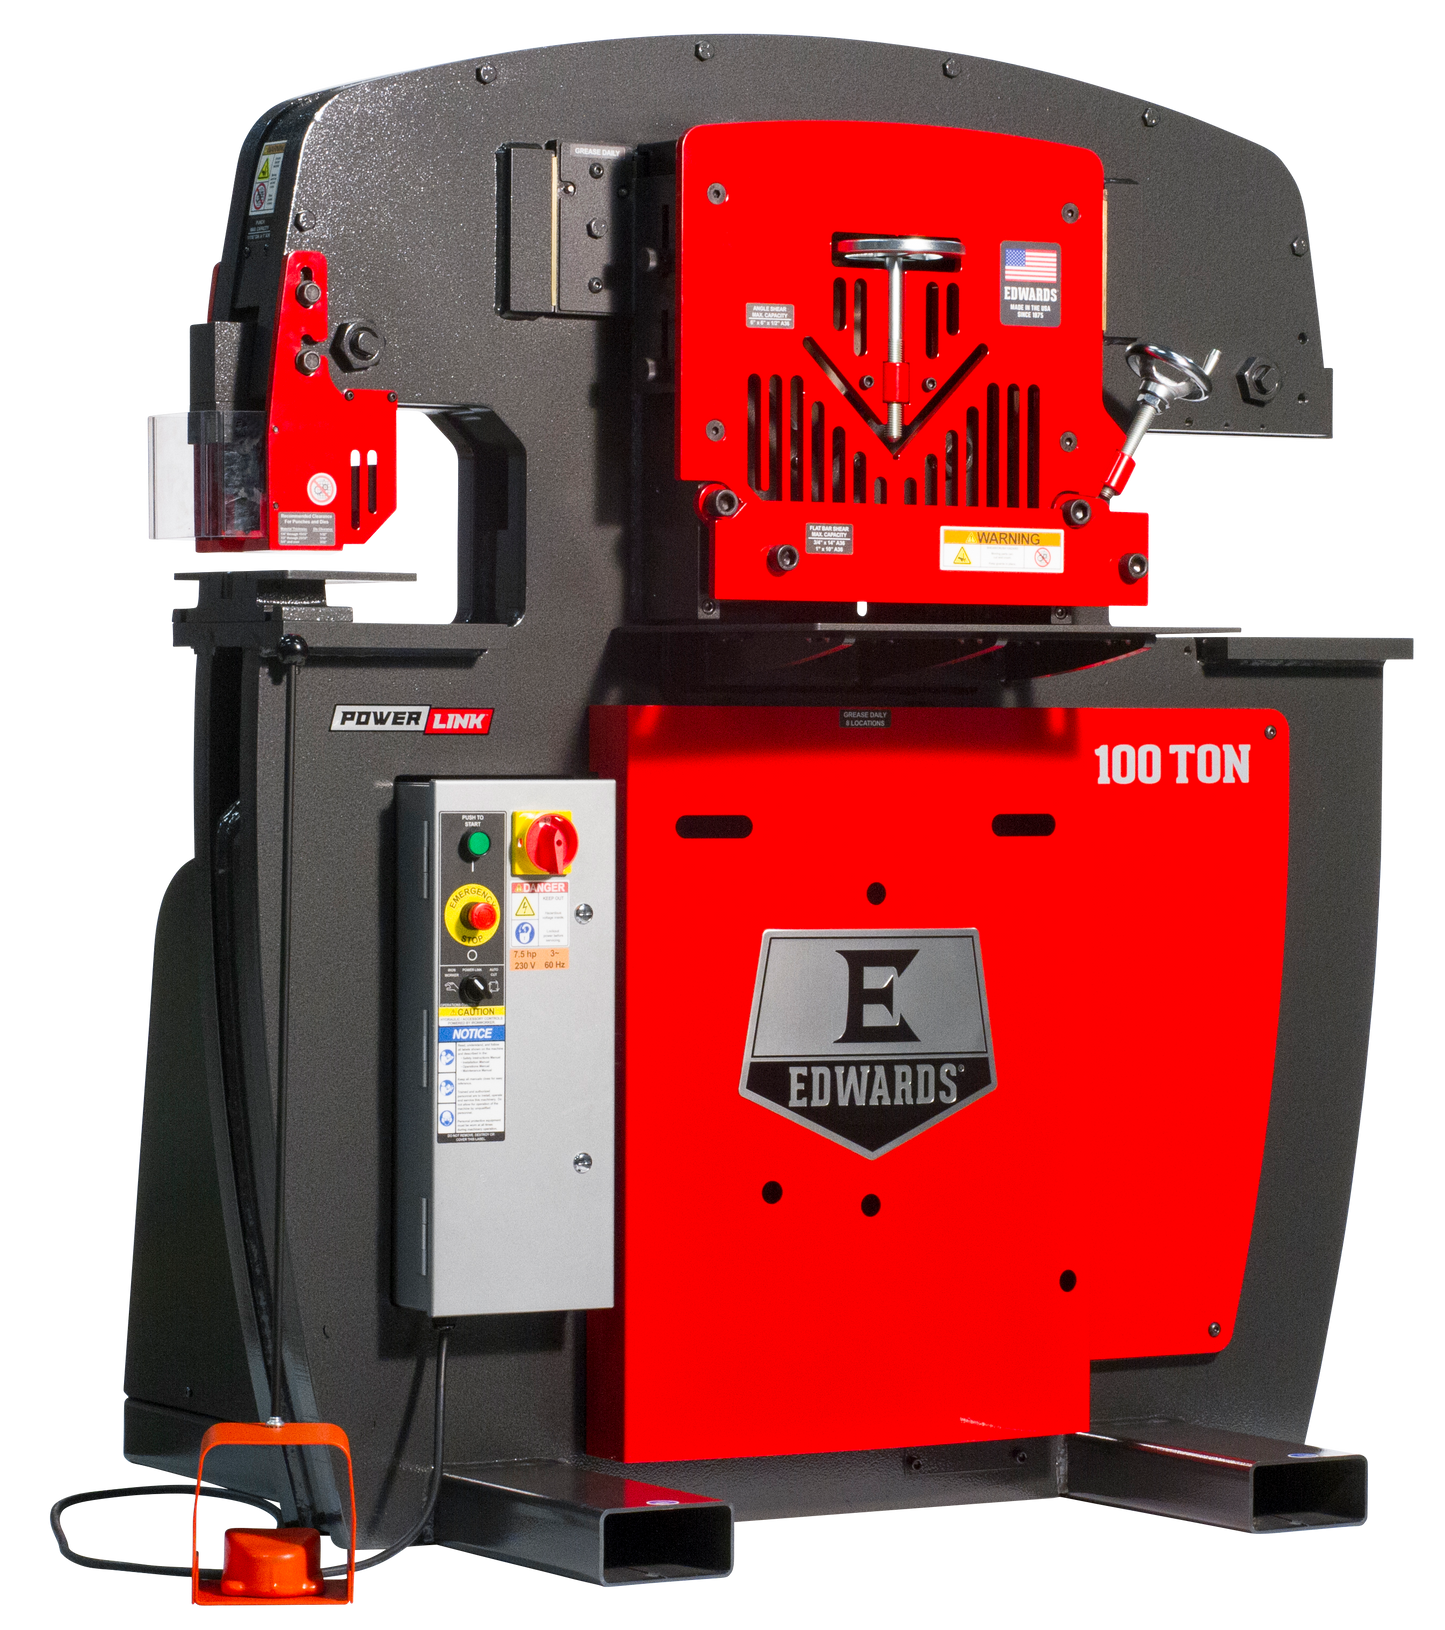 100 Ton Ironworker 3 Phase, 208 Volt with PowerLink